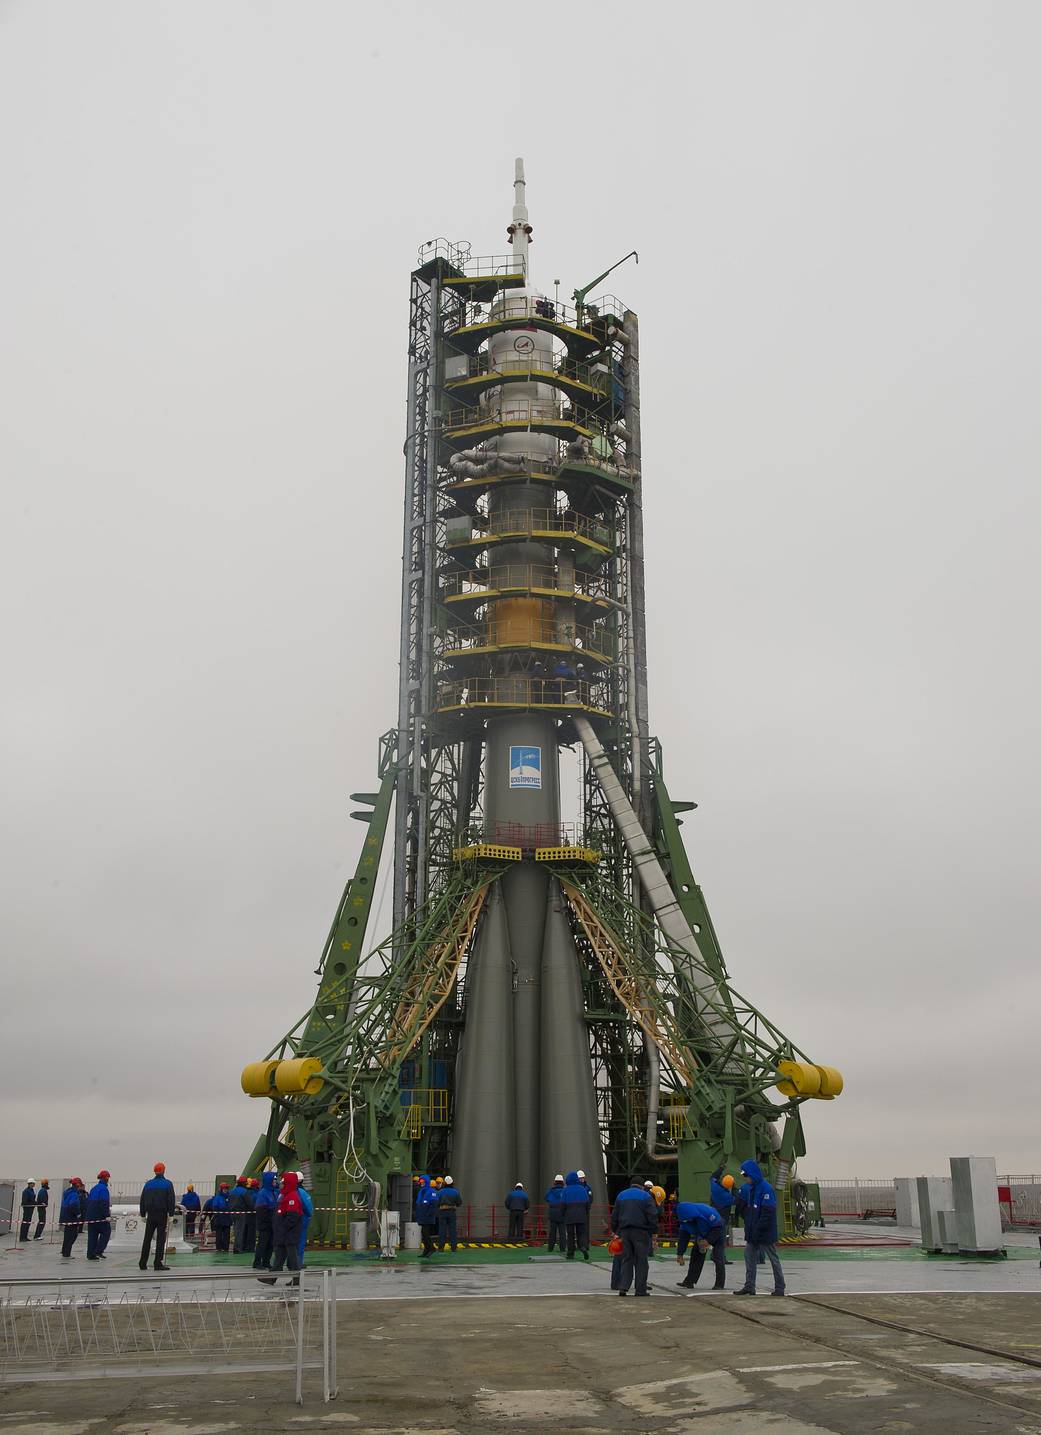 Soyuz rocket vertical at launch pad with tower surrounding, on cloudy day